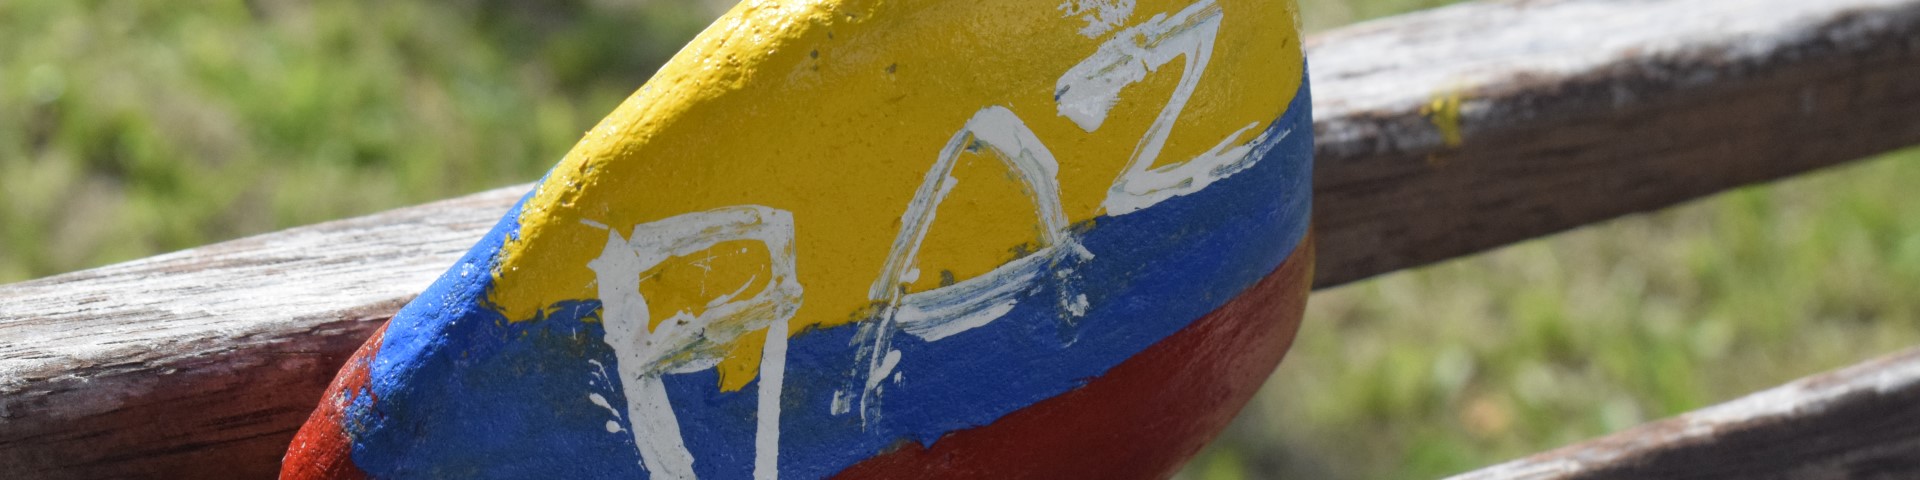 A stone painted with the word ‘PAZ’ lies against the back of a wooden bench.